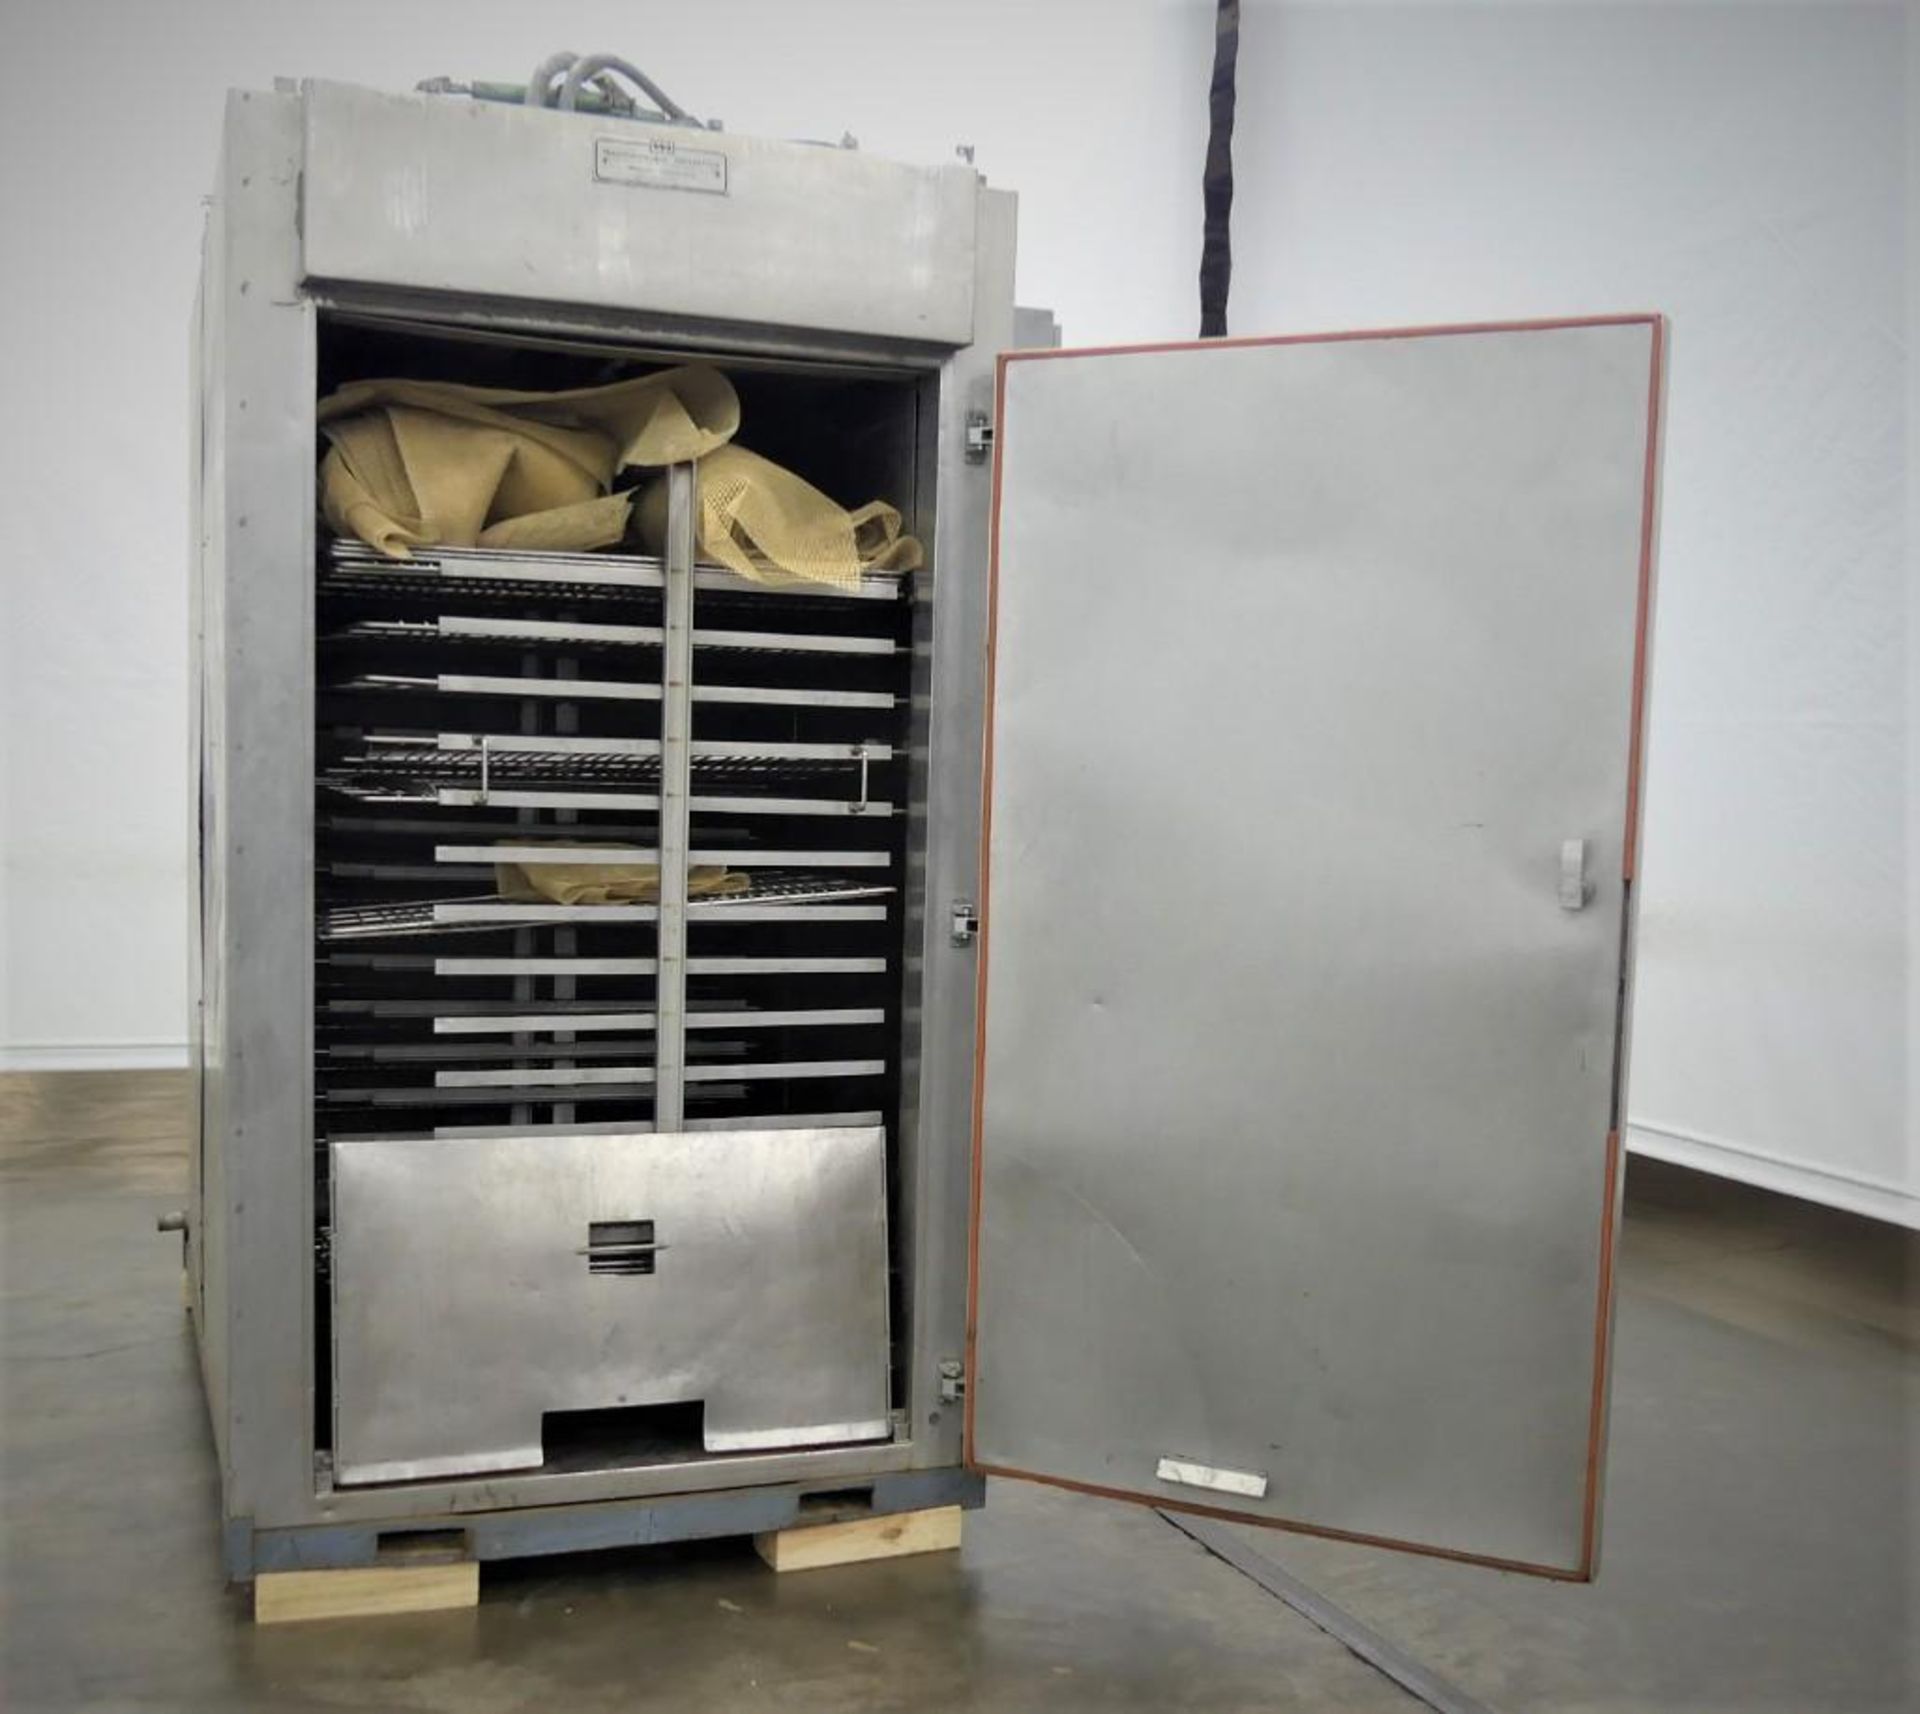 Maurer & Sohne Two Truck Stainless Smokehouse - Image 5 of 10